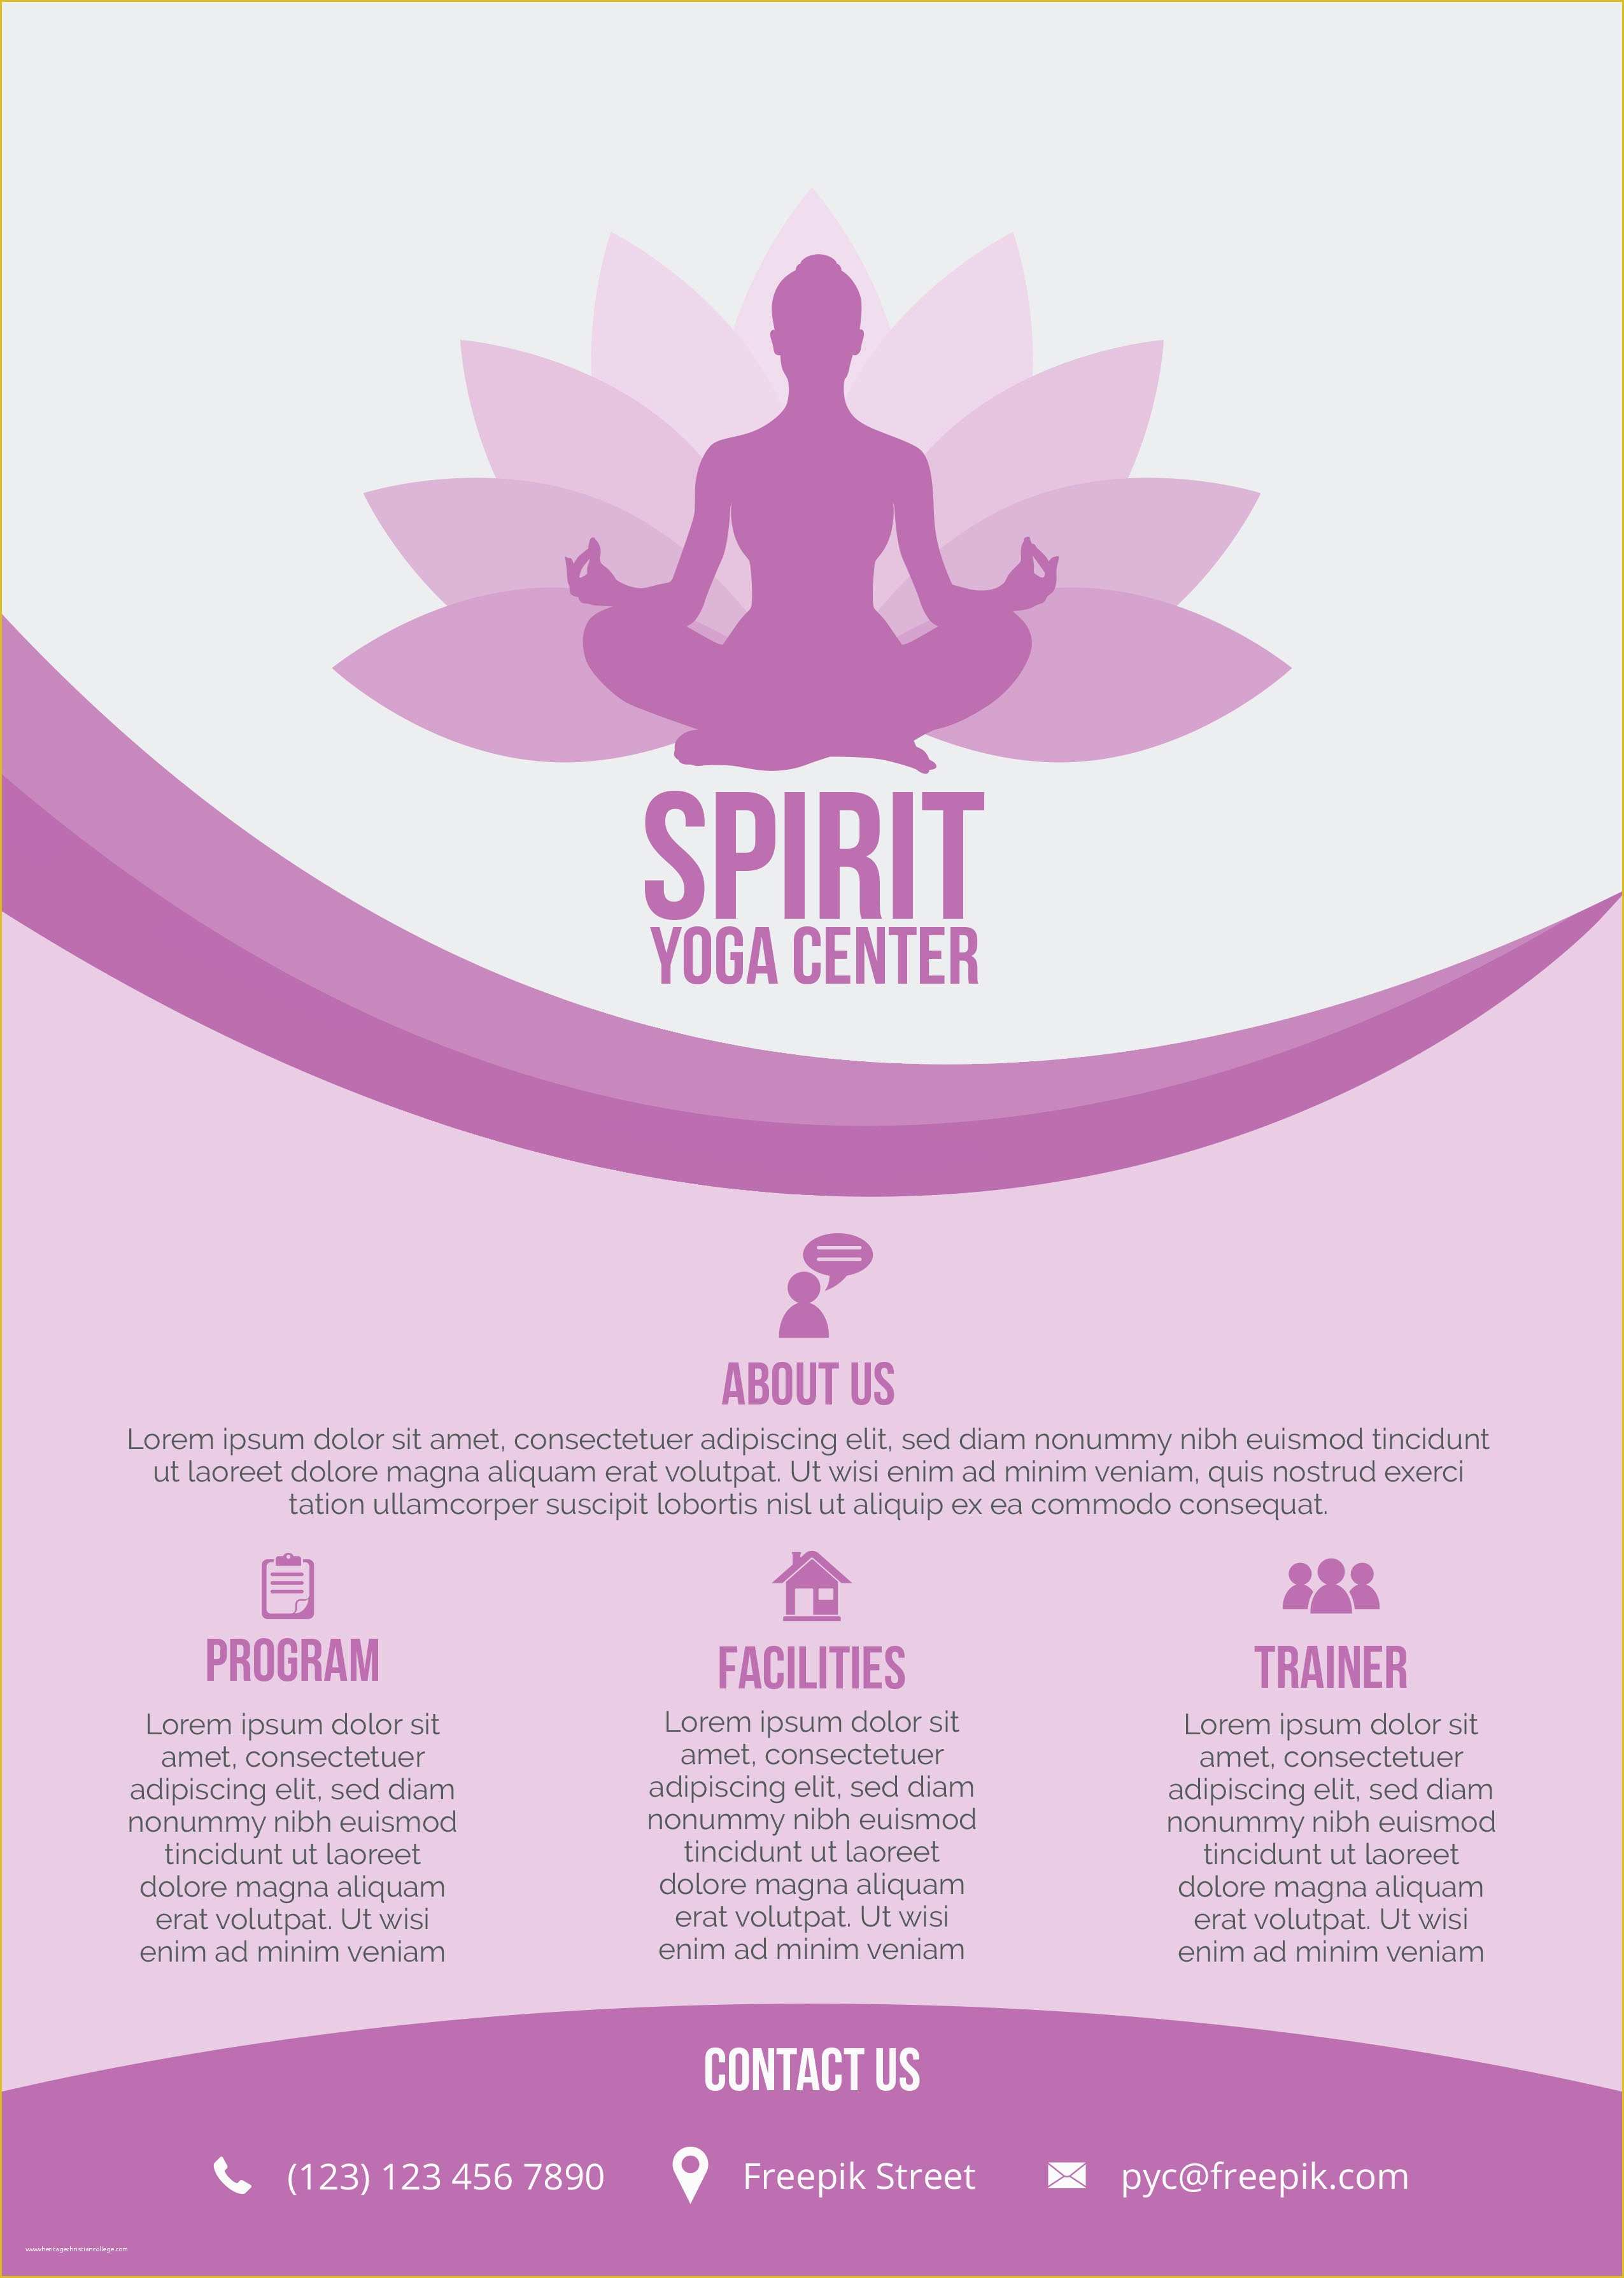 Free Flier Templates Of 20 Distinctive Yoga Flyer Templates Free for Professionals